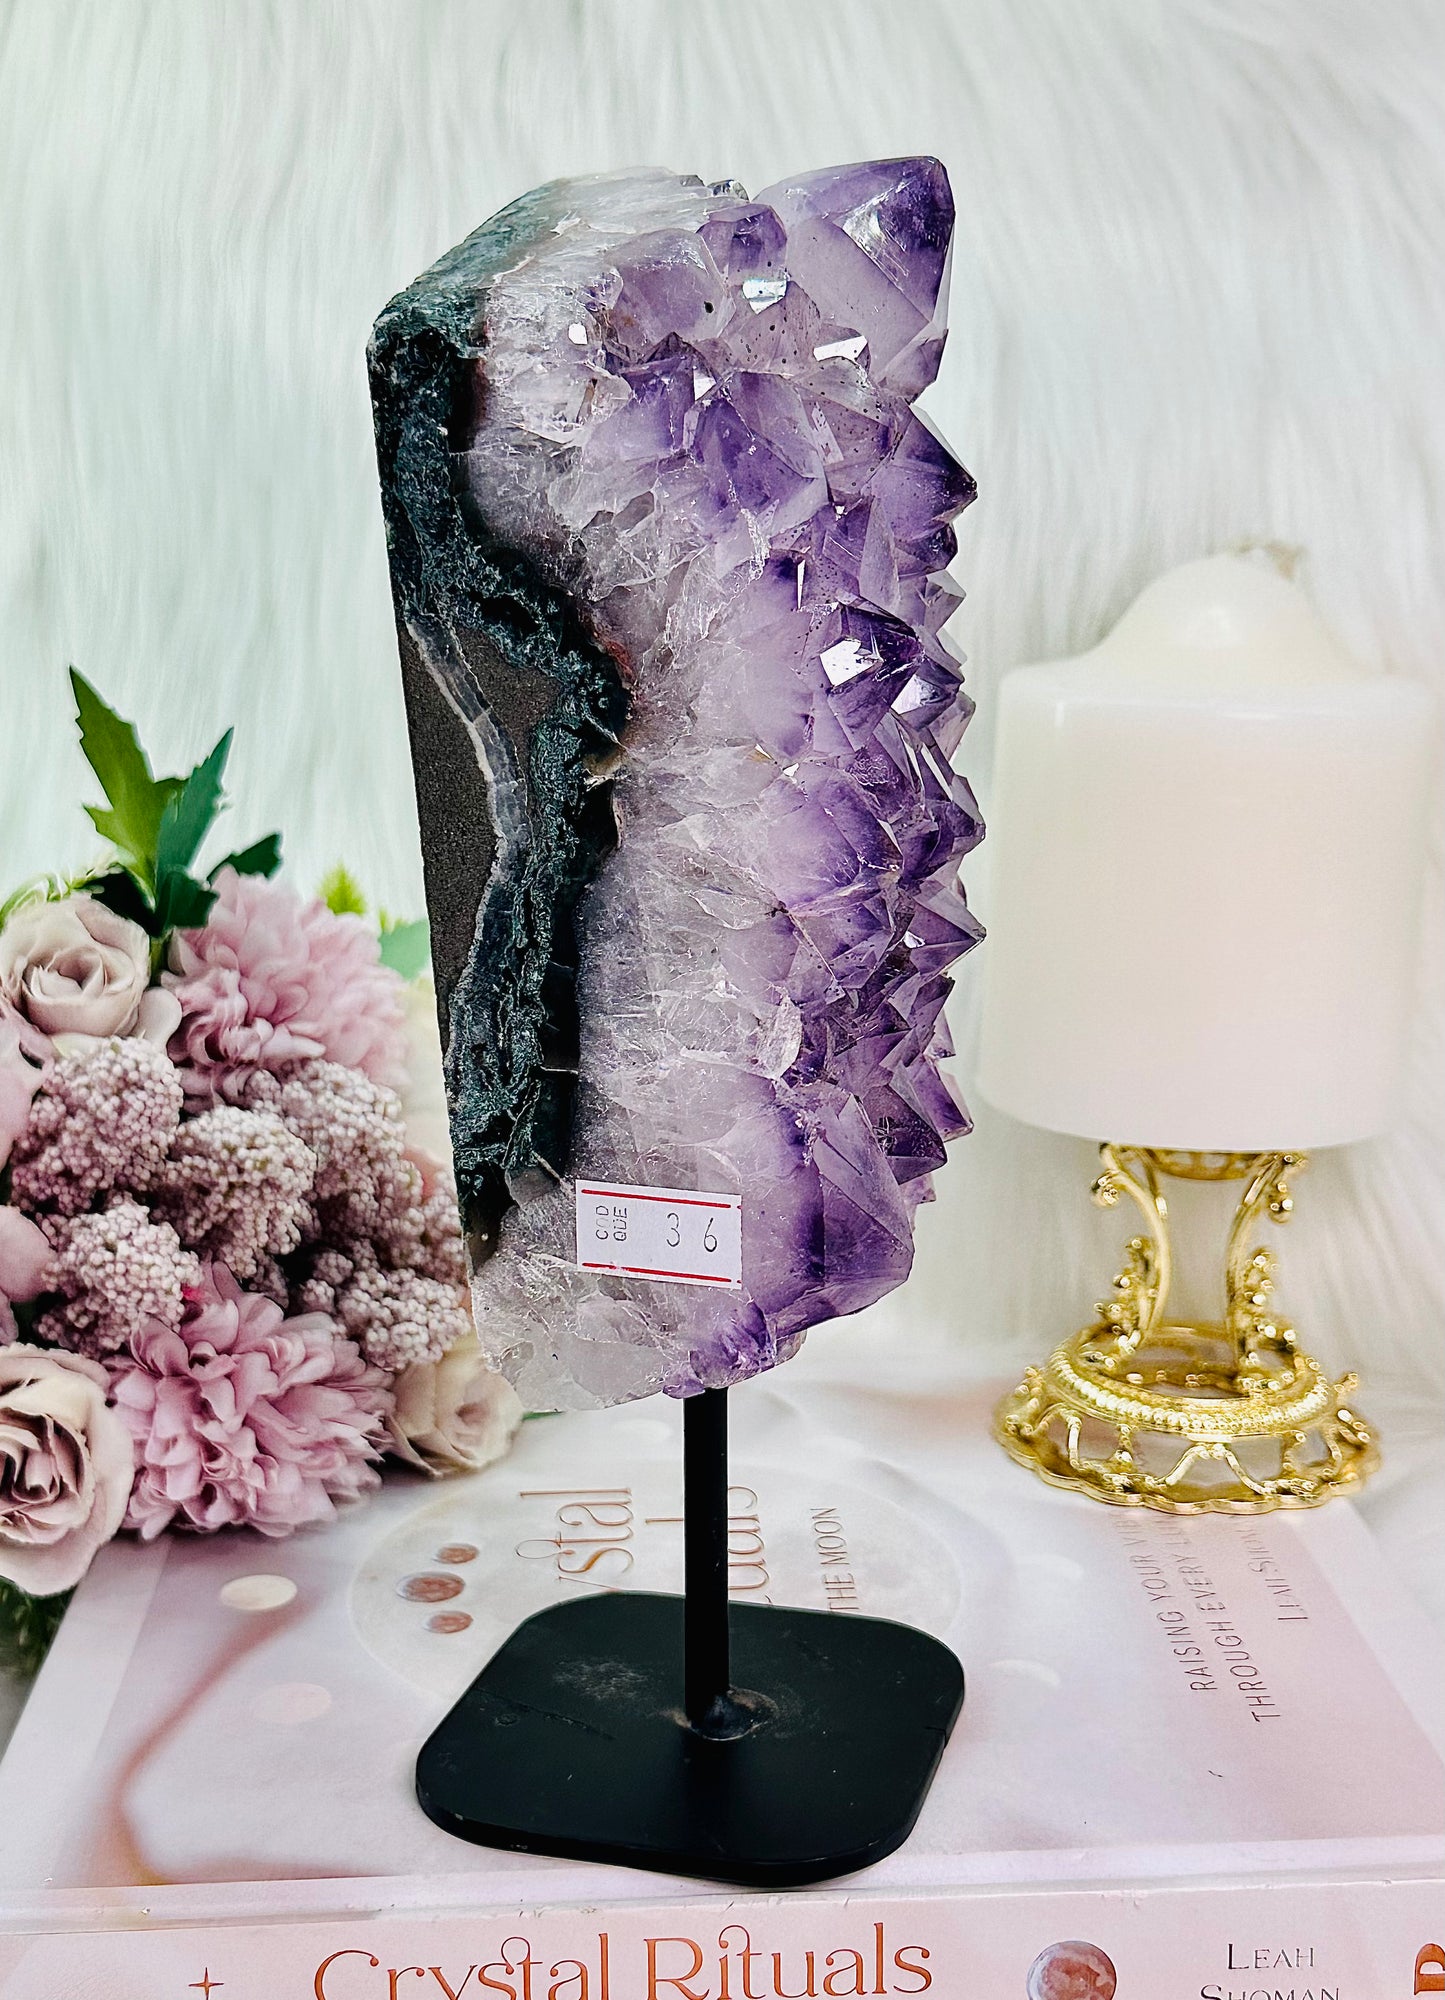 WOW!!!! Classy & Fabulous Large 1.4KG 22cm High Grade Chunky Amethyst Agate Cluster On Stand From Brazil ~ A Truly Exquisite Piece